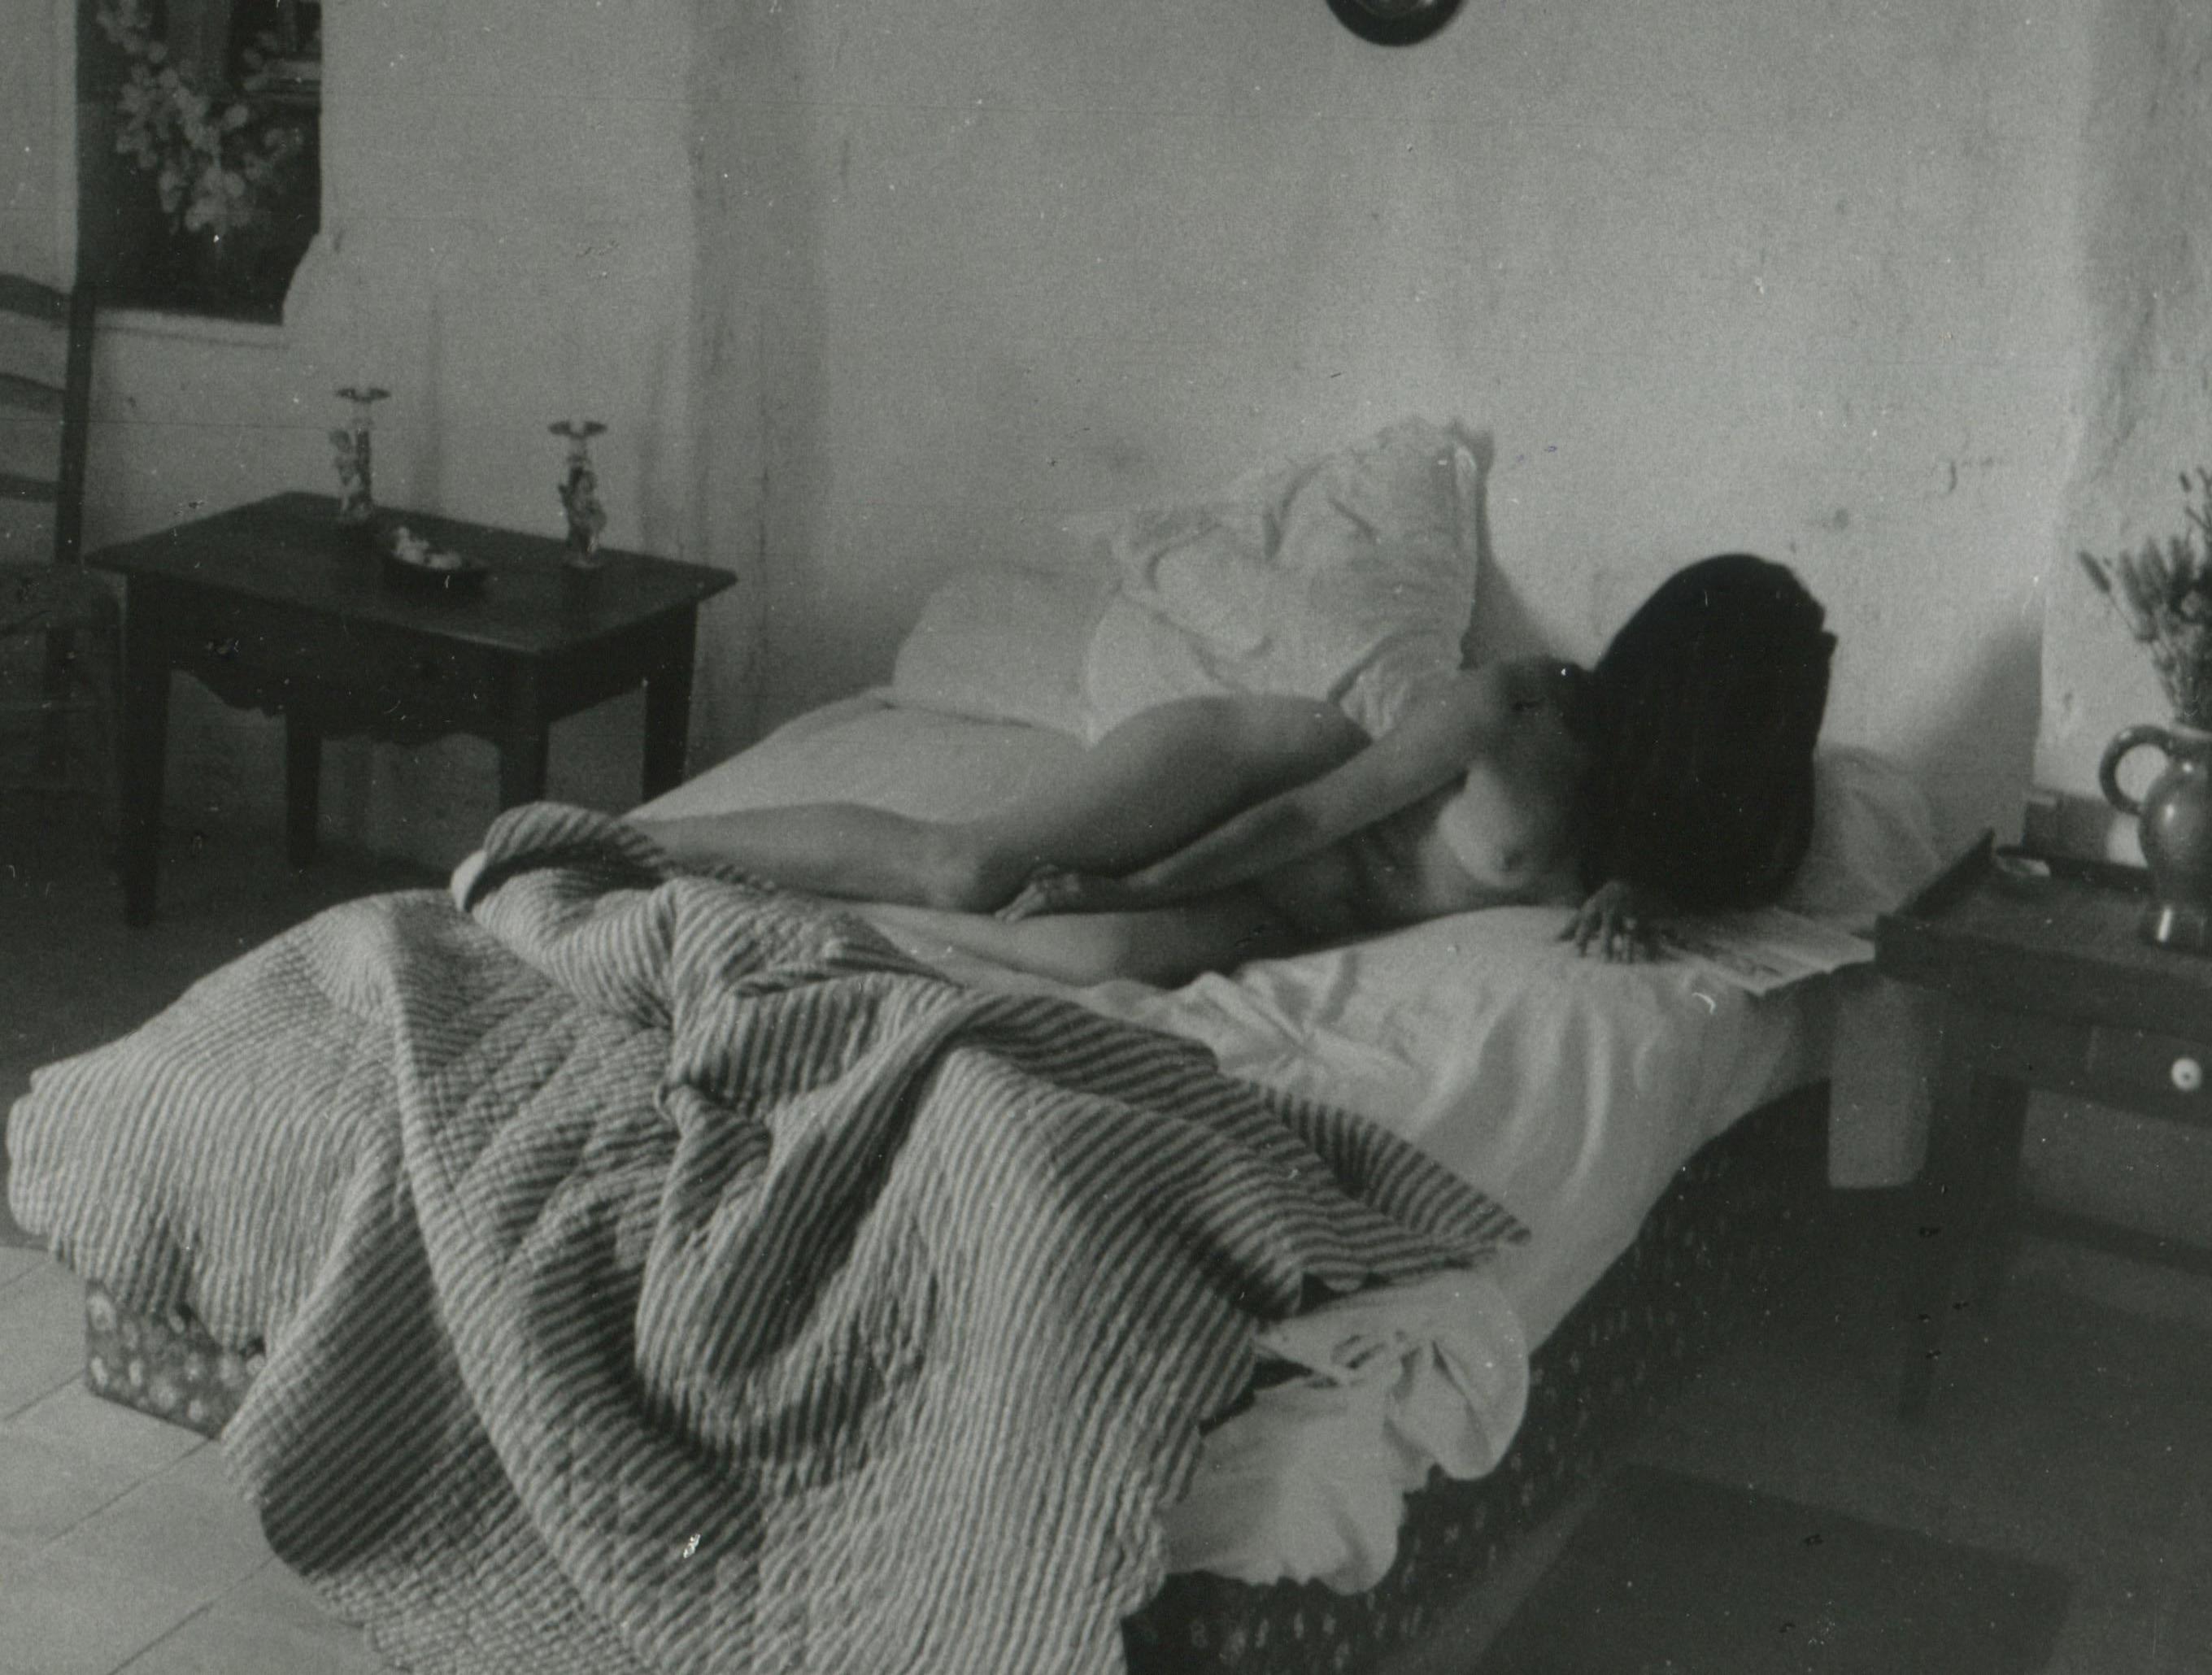 Female Nude in Bed, Gordes - Photograph by Willy Ronis